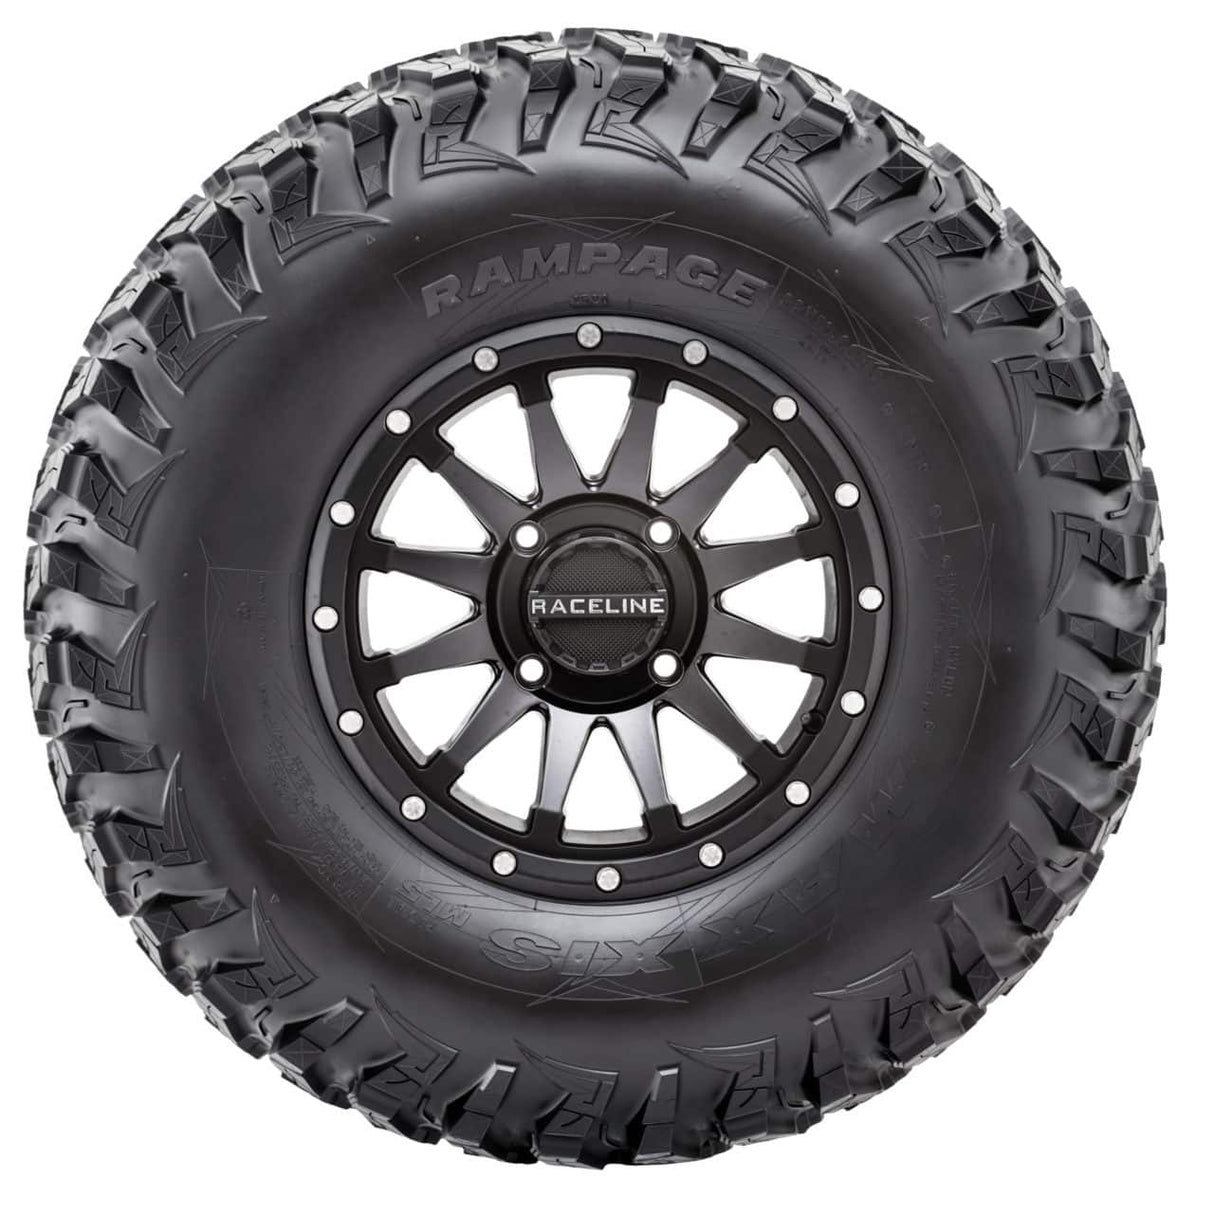 Maxxis Rampage Radial Tires